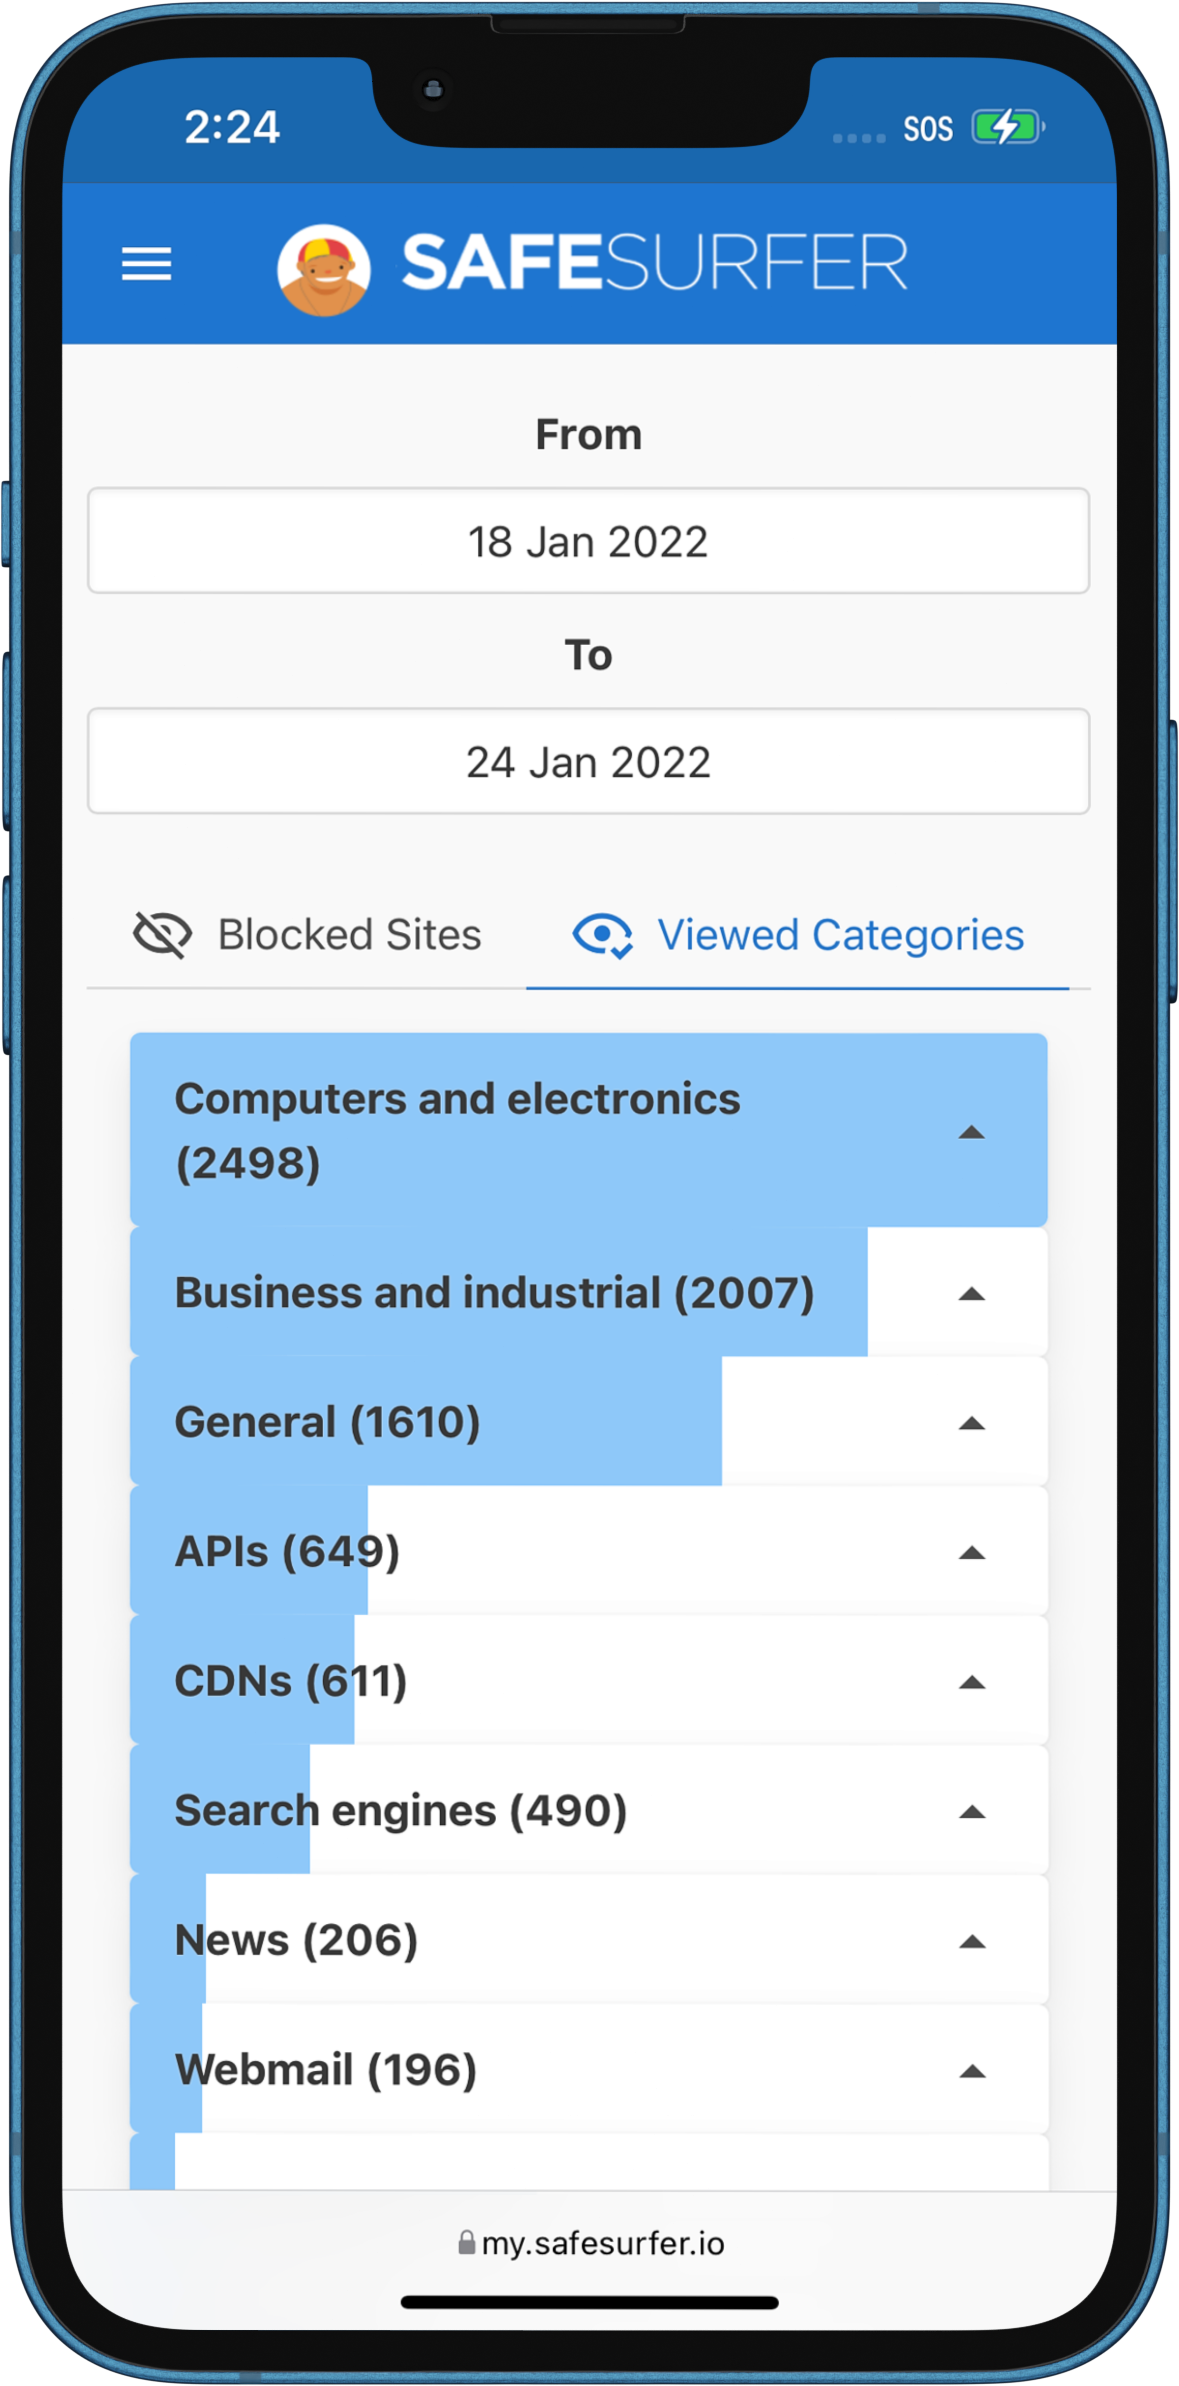 iPhone showing Safe Surfer internet history user interface, with recent activity for Computers and Electronics, Business and Industrial, General, APIs, CDNs, Search engines, News, and Webmail.